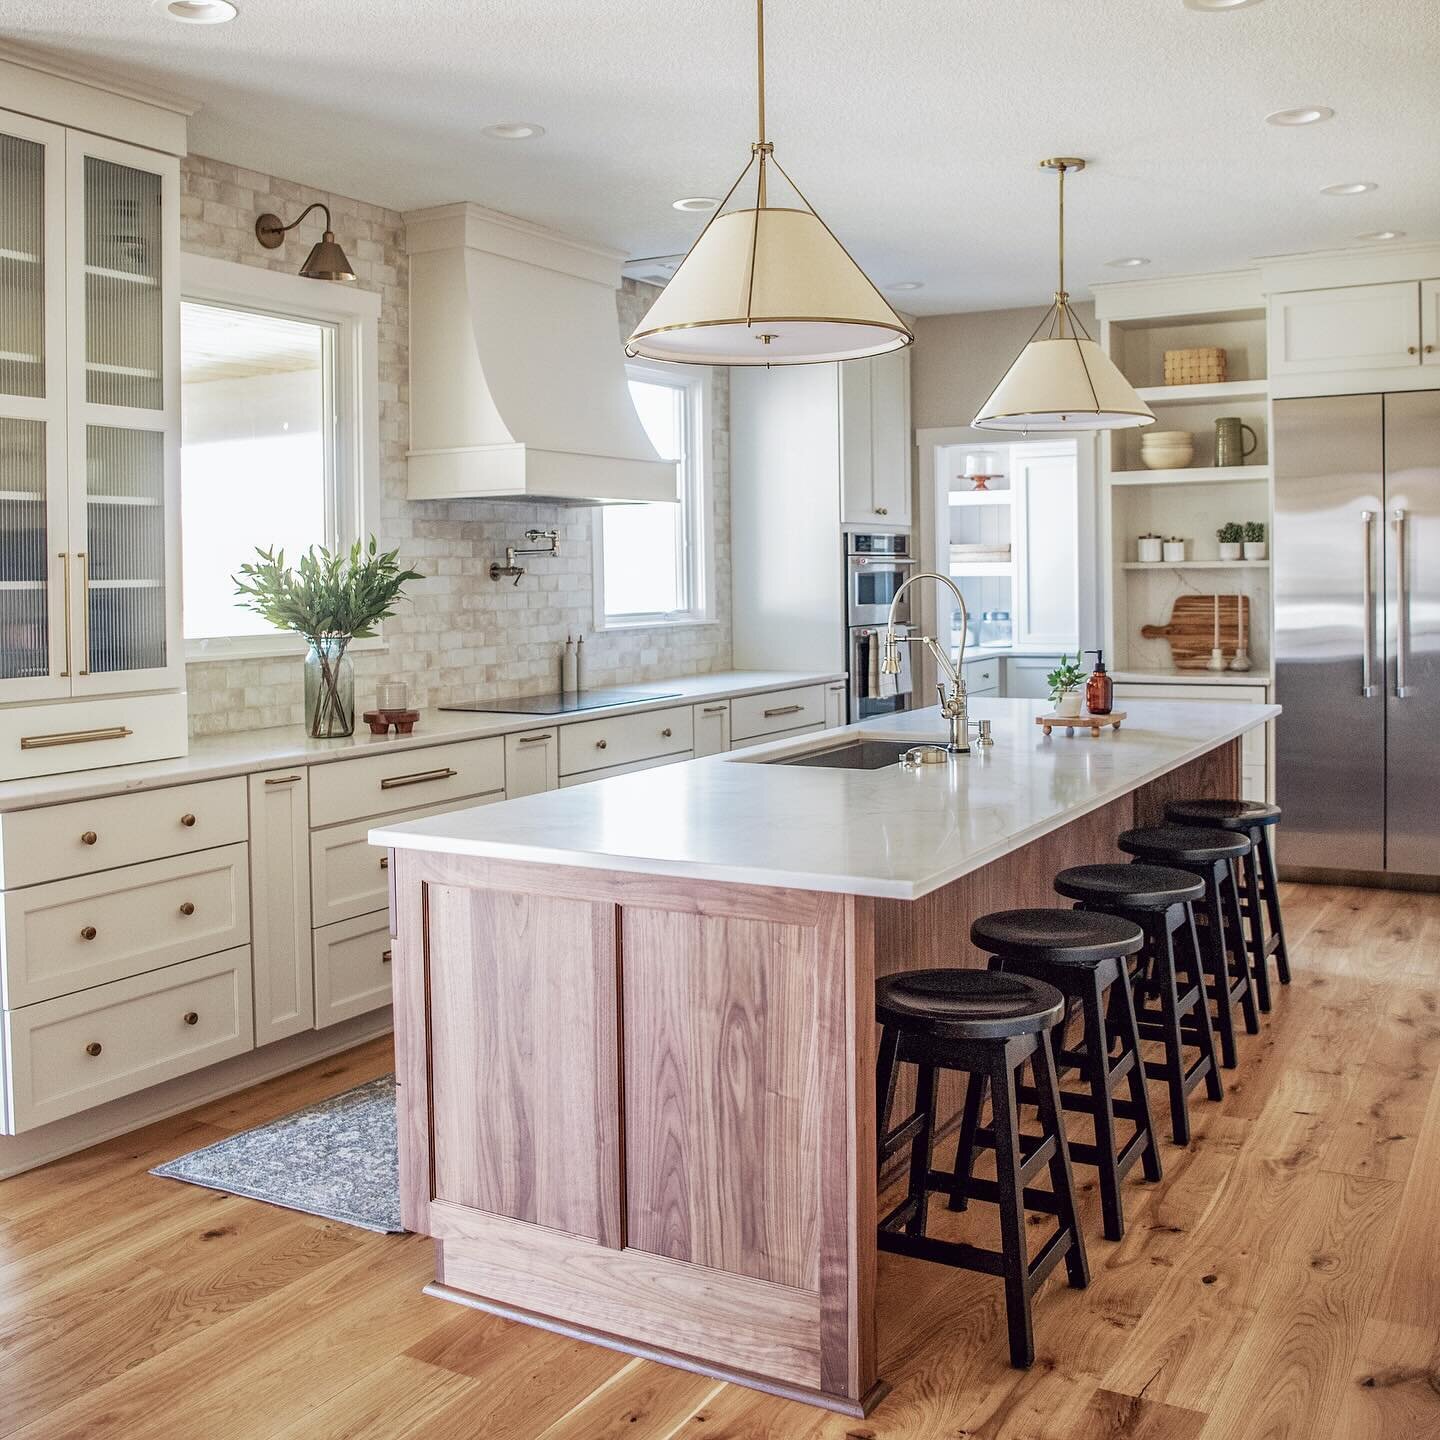 If a kitchen renovation could talk, it would tell you about more than just the before and afters&hellip;a lot of life can be lived in just a few months. In this case, my clients welcomed a baby girl and I lost a parent. Big life stuff. When I think b